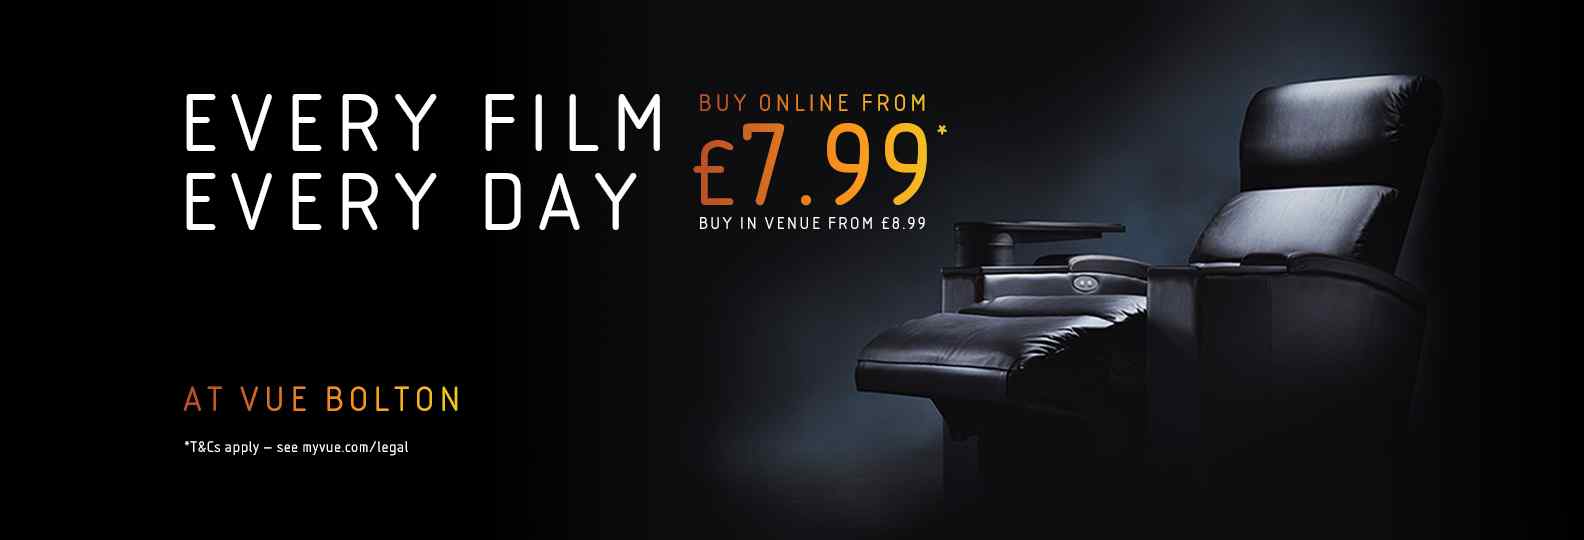 Vue Bolton | Every Film, Every Day from £7.99